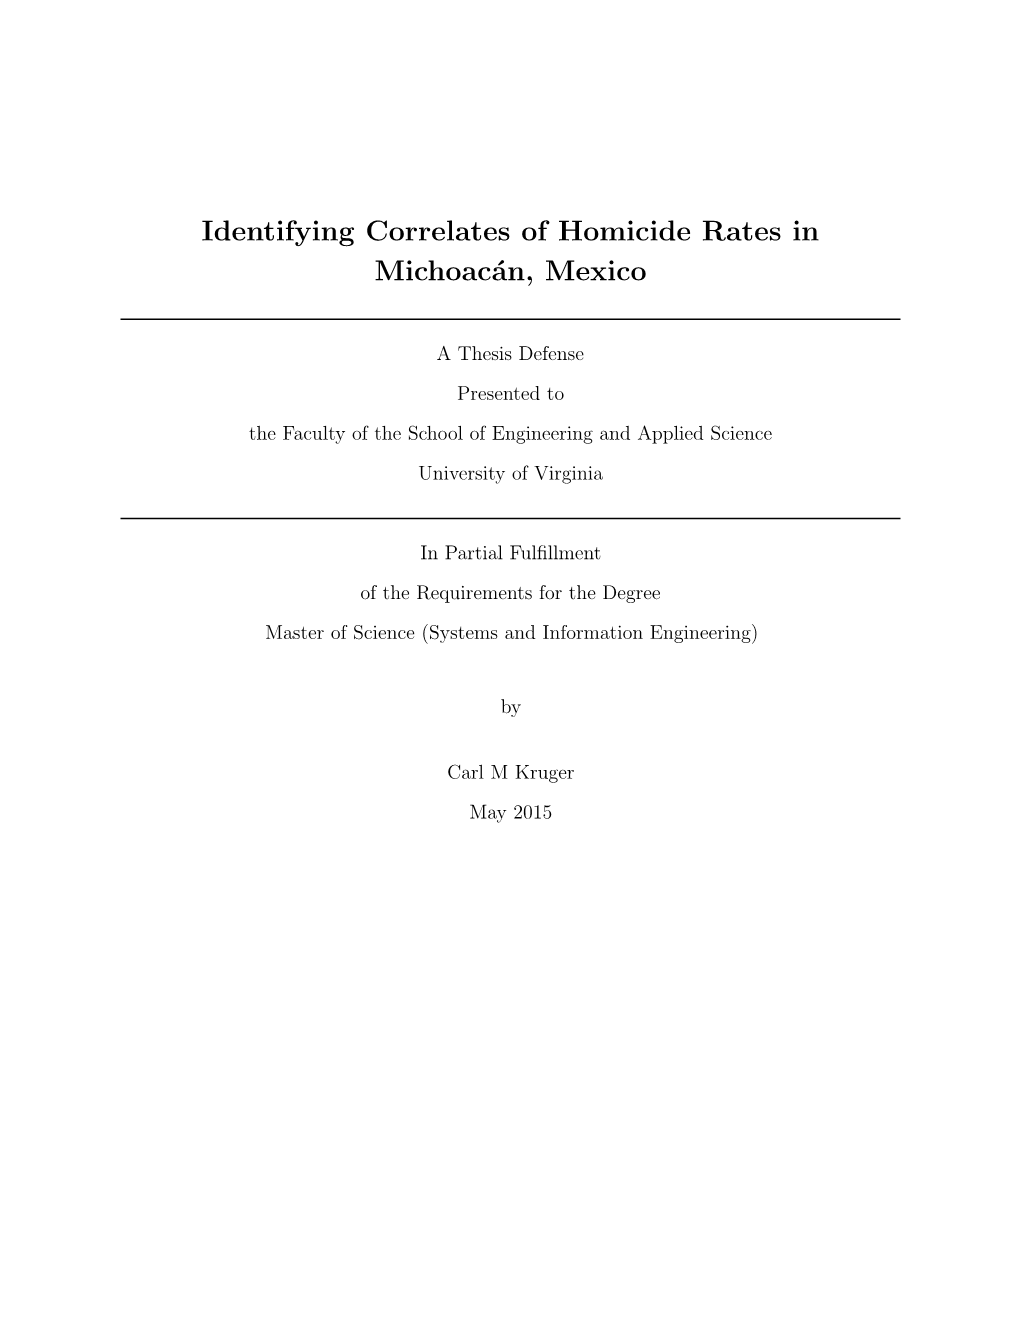 Identifying Correlates of Homicide Rates in Michoacán, Mexico